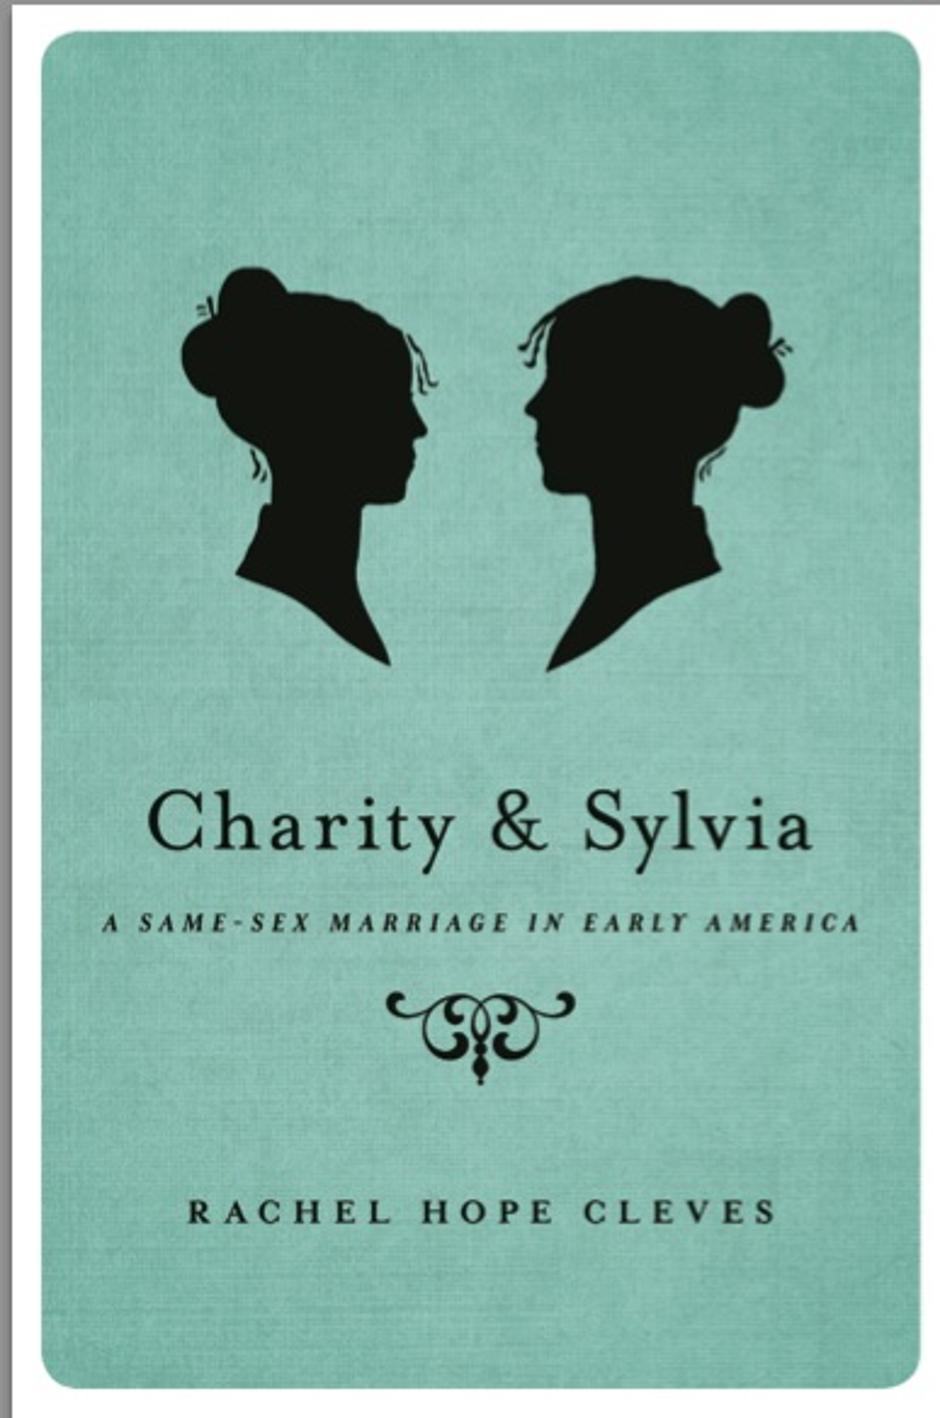 Charity and Sylvia: A Same-Sex Marriage in Early America | Author: rachelhopecleves.com